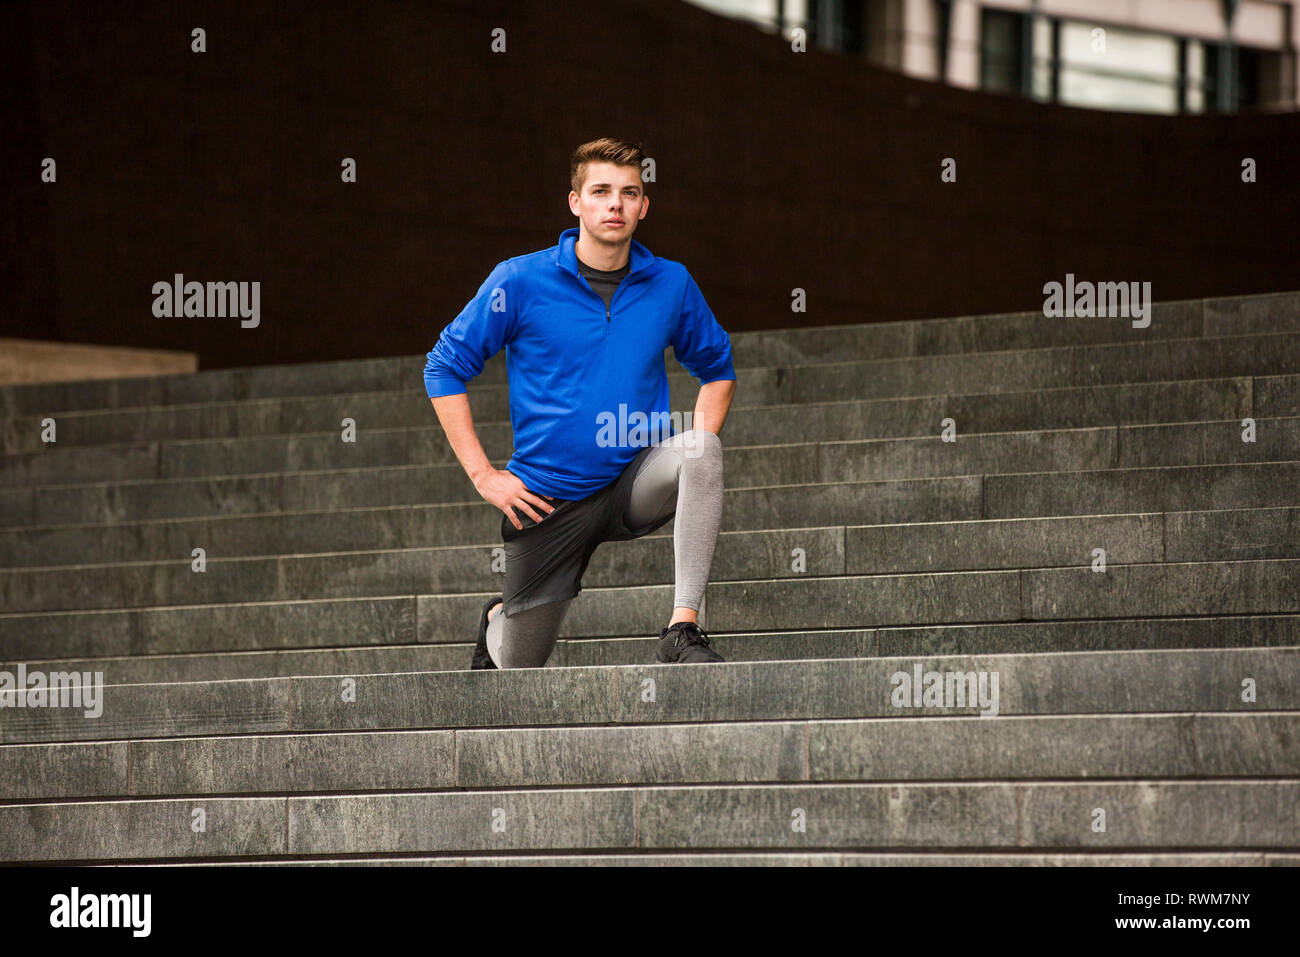 Young runner stretching on steps, London, UK Stock Photo